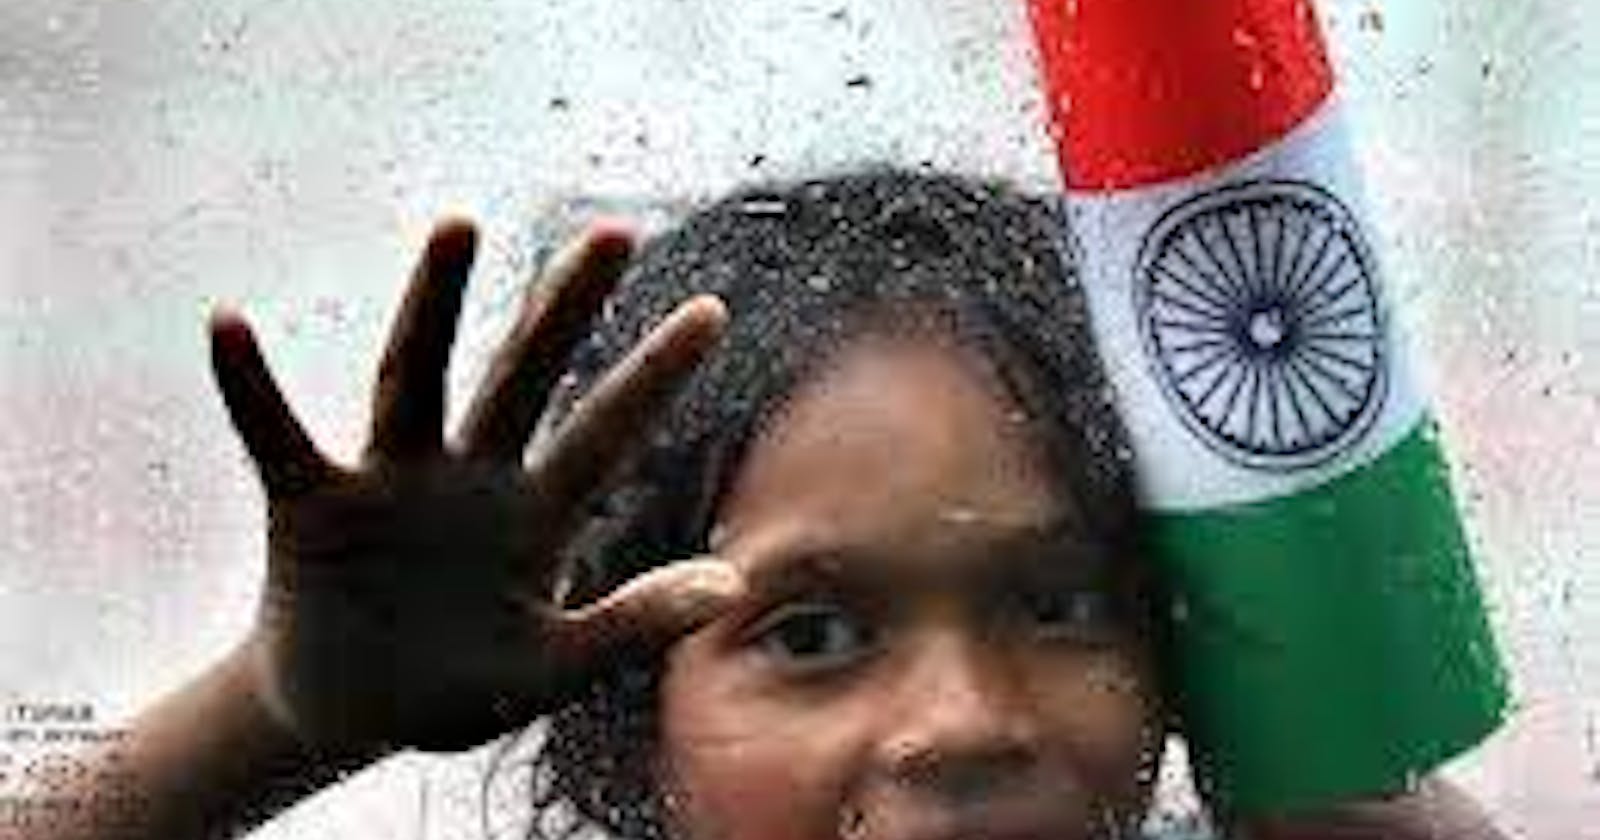 IDEA OF INDIA

So the idea of India is of one land embracing many. The Indian idea is that a nation may endure differences of caste, creed, colour